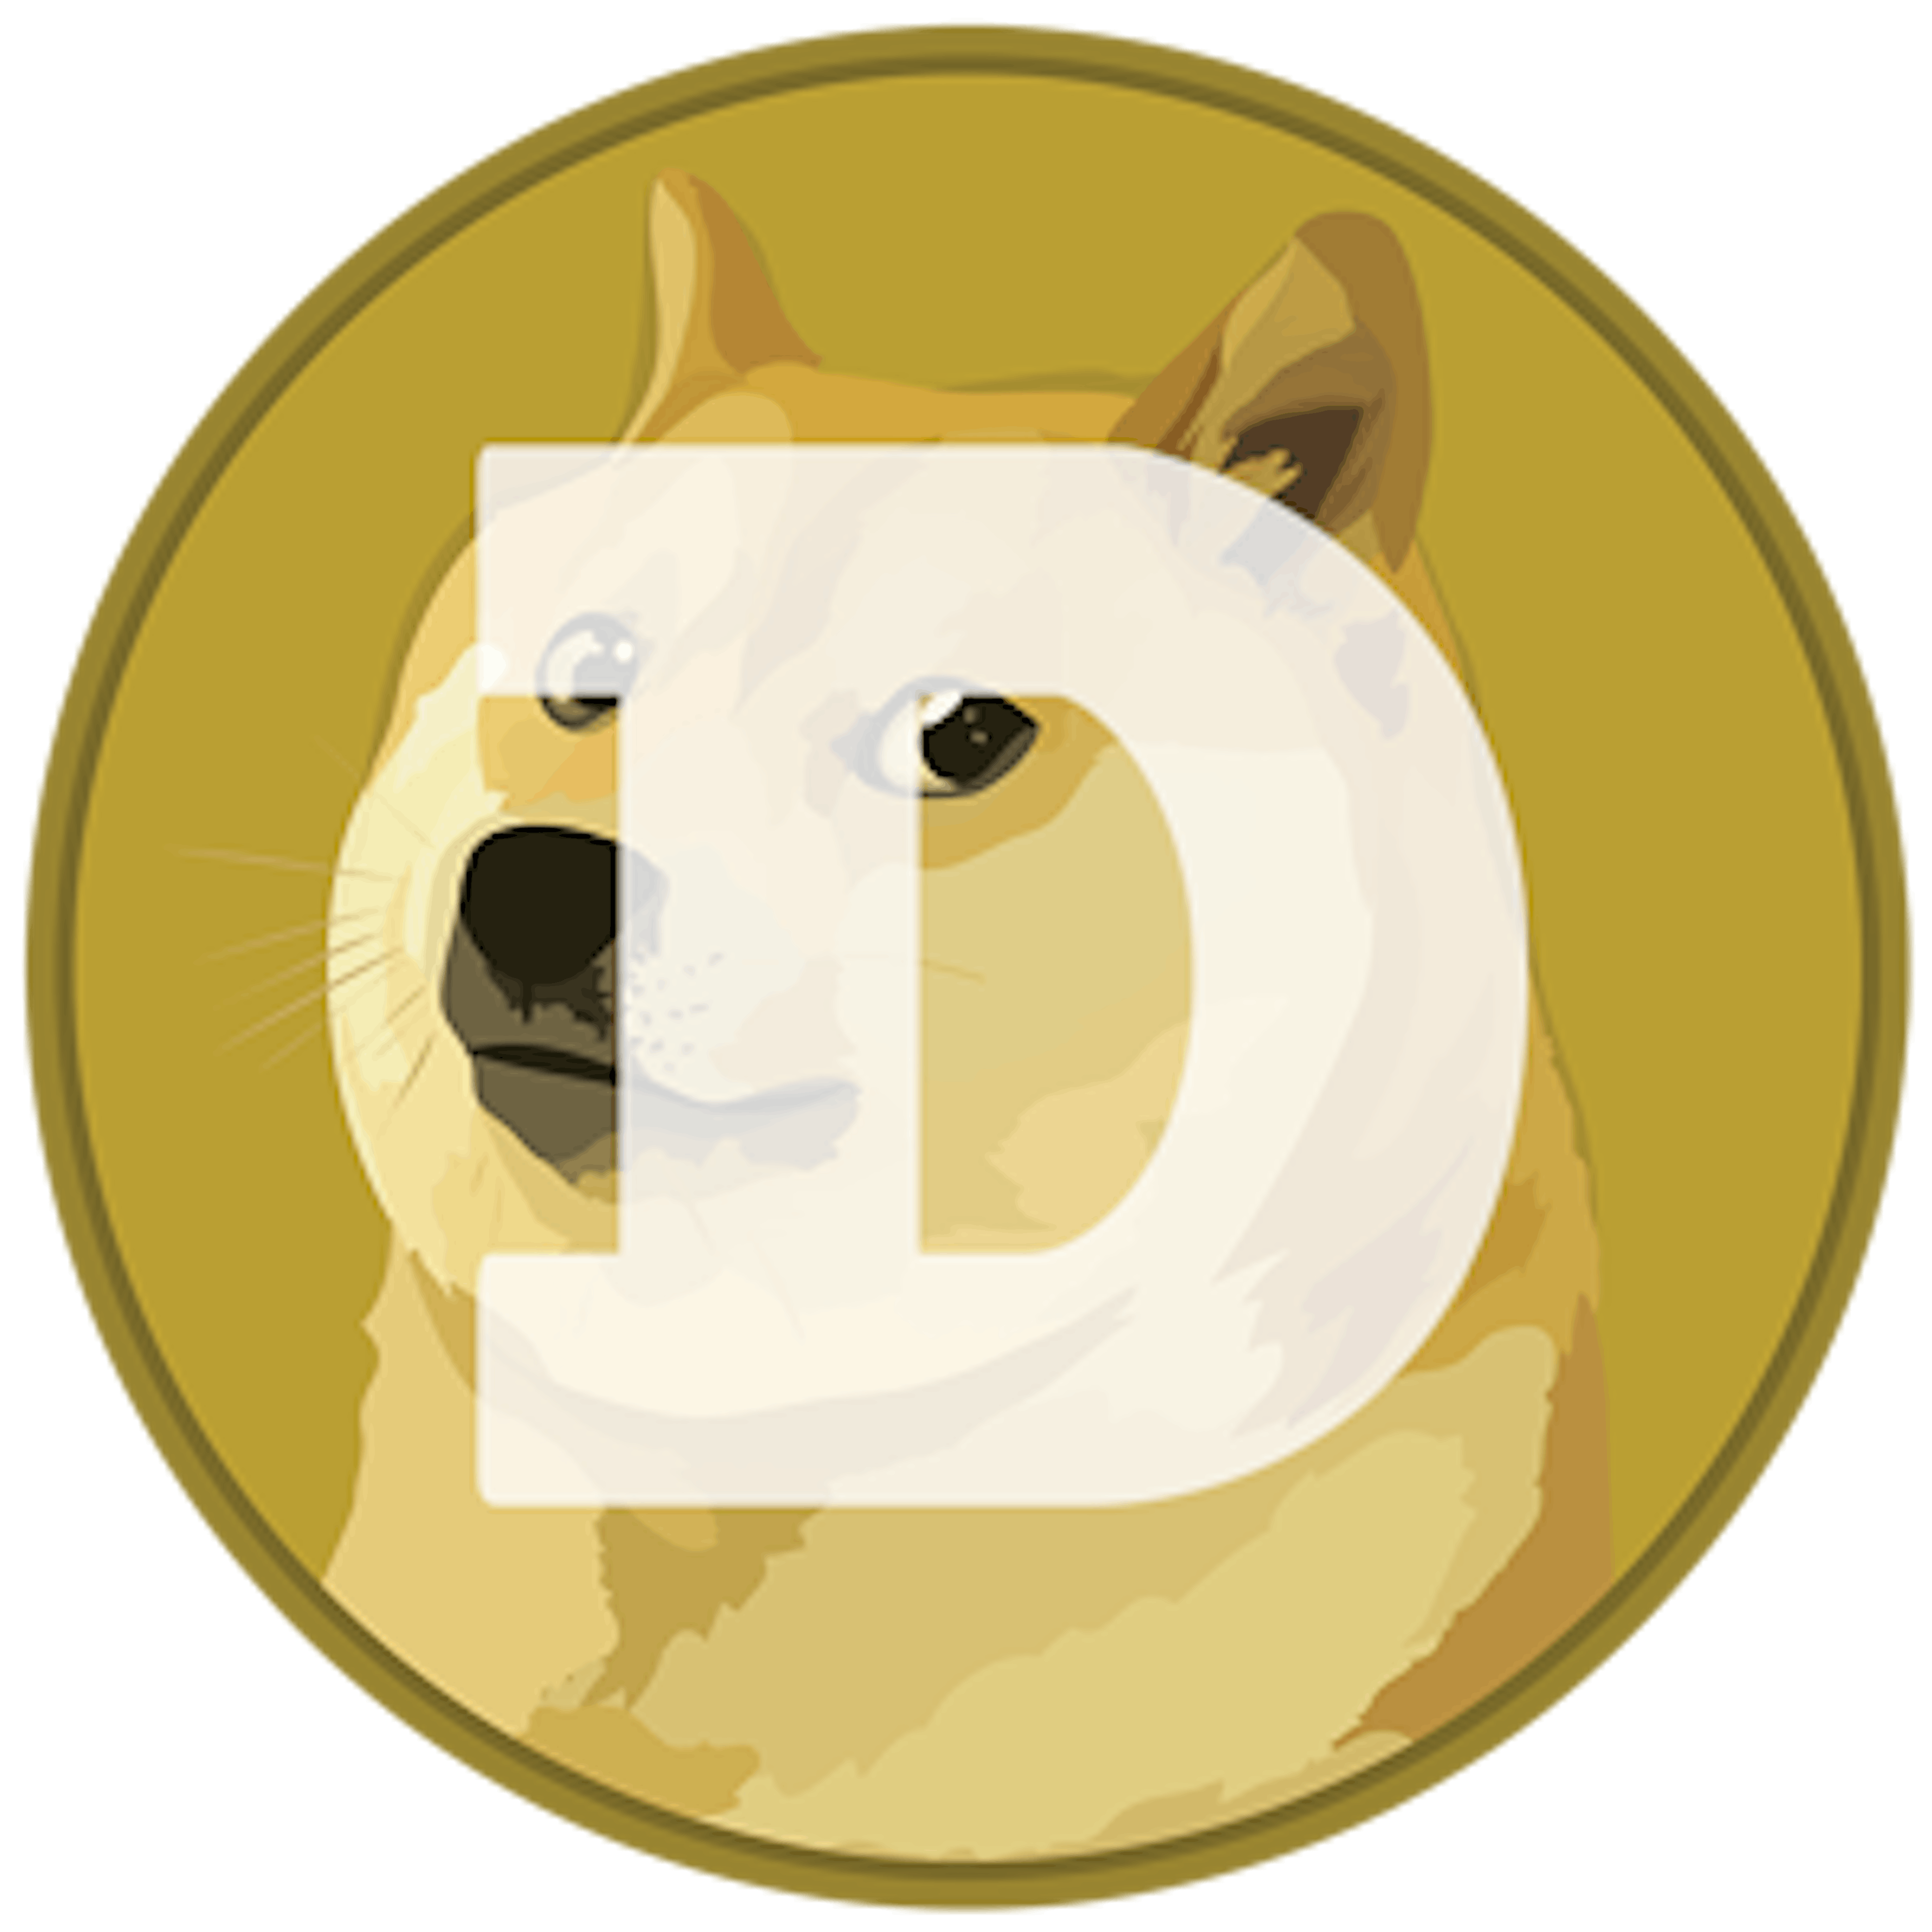 /dogecoin-the-value-proposition-thats-worth-more-than-a-penny-3m2i34yc feature image